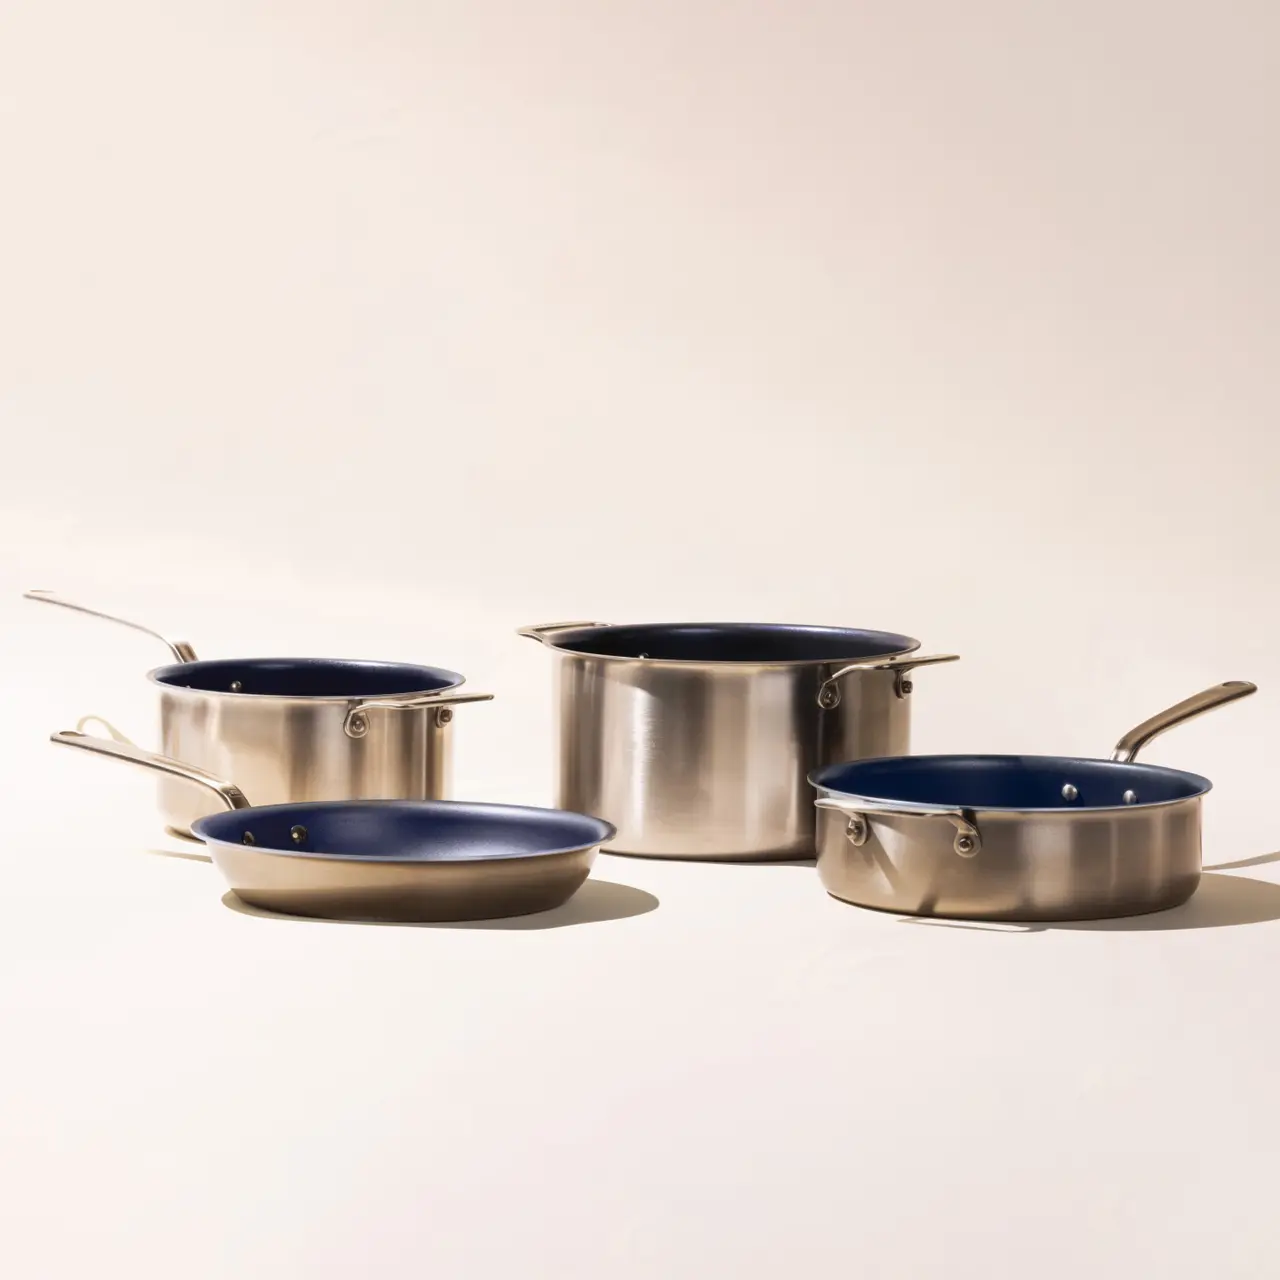 Cookware Set Special Deals | Voted Best Non Stick Set | Professional-Quality | Lifetime Warranty | Made in